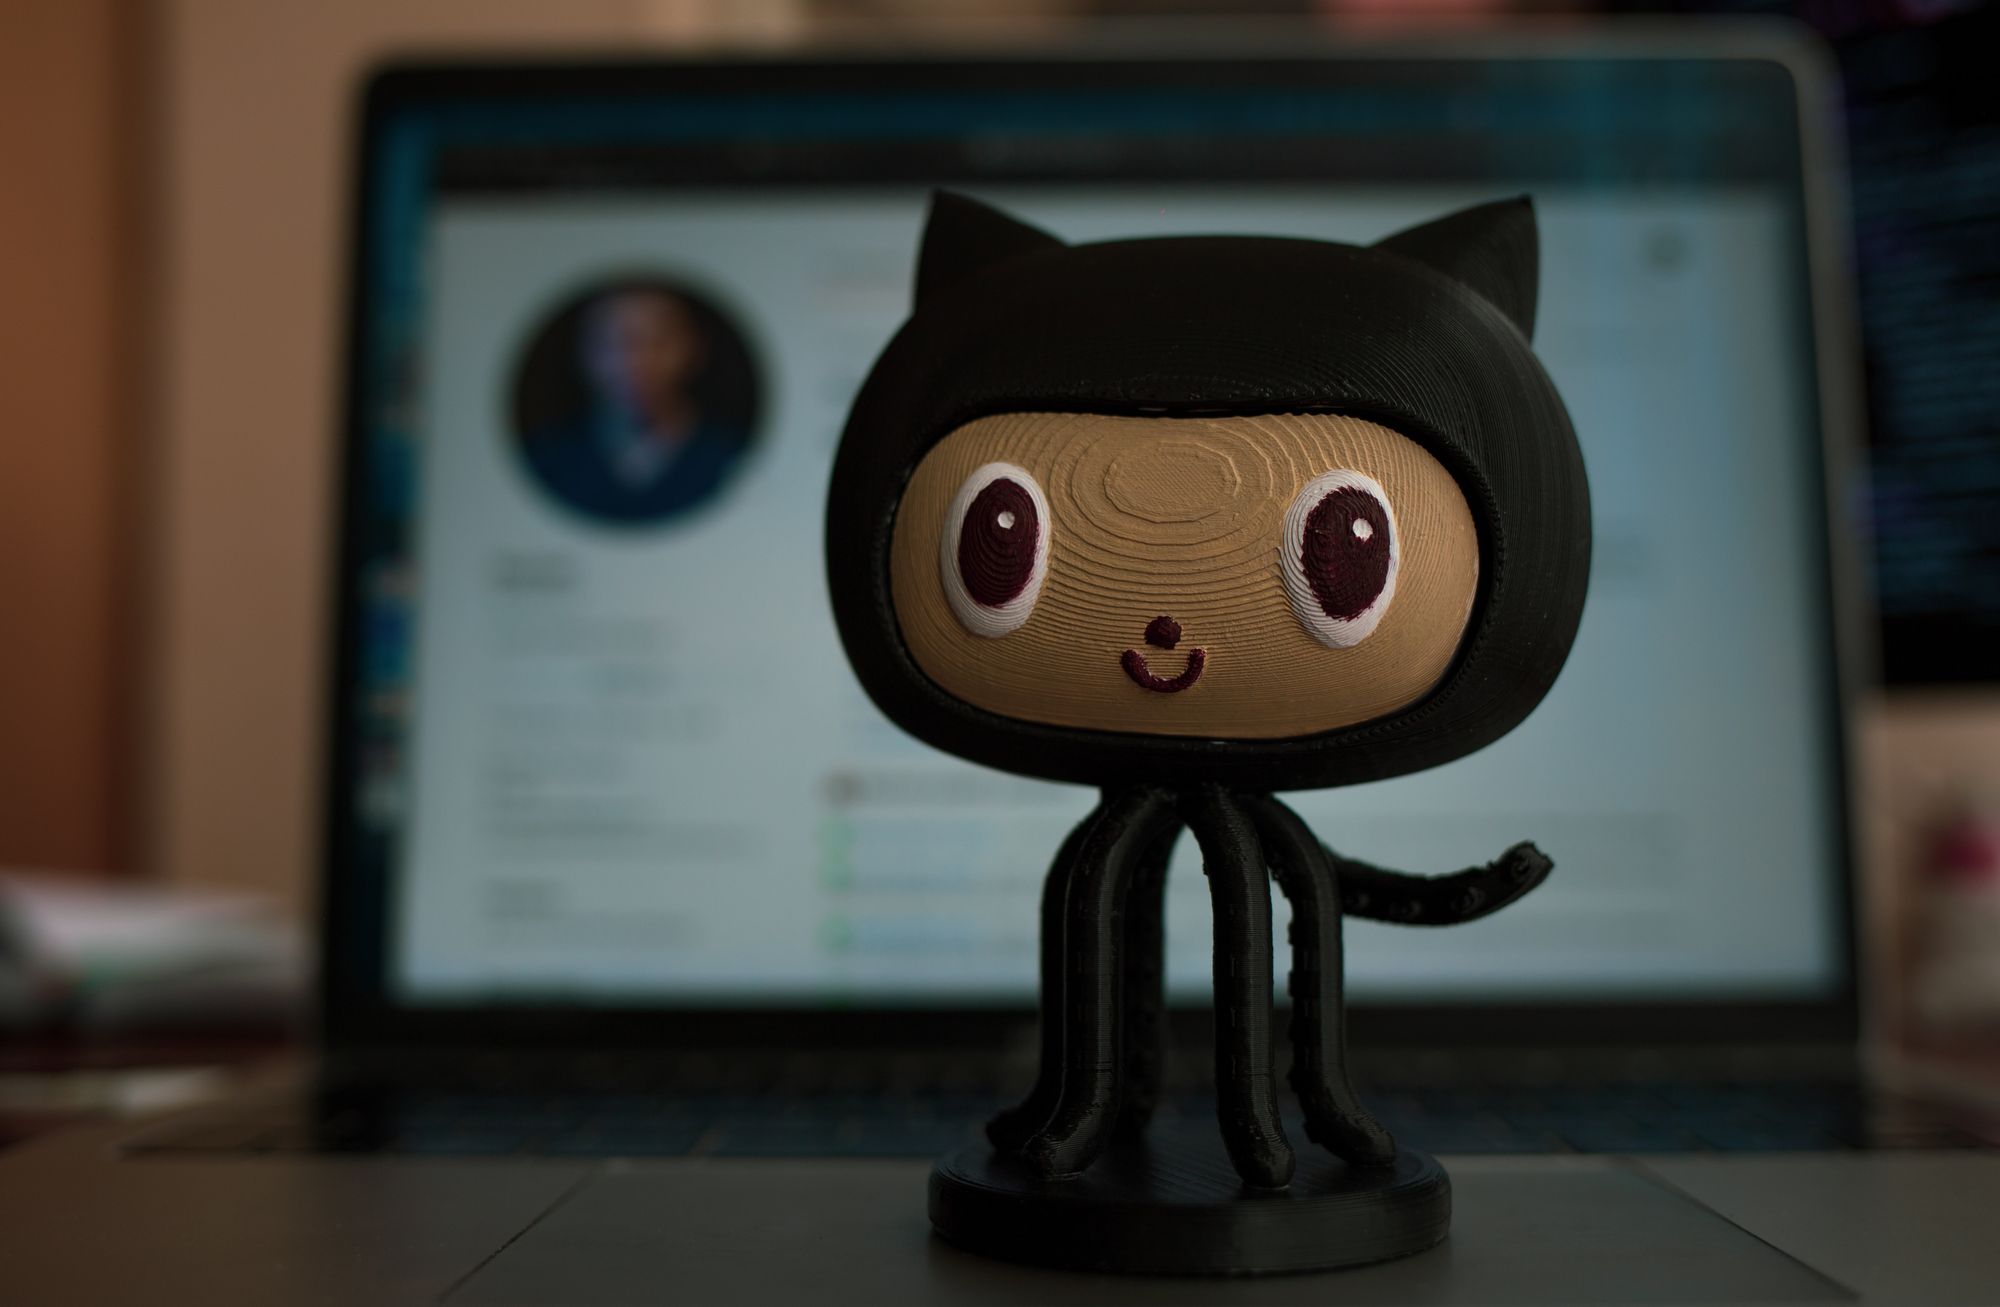 GitHub's mascot sitting on top of a MacBook's trackpad.